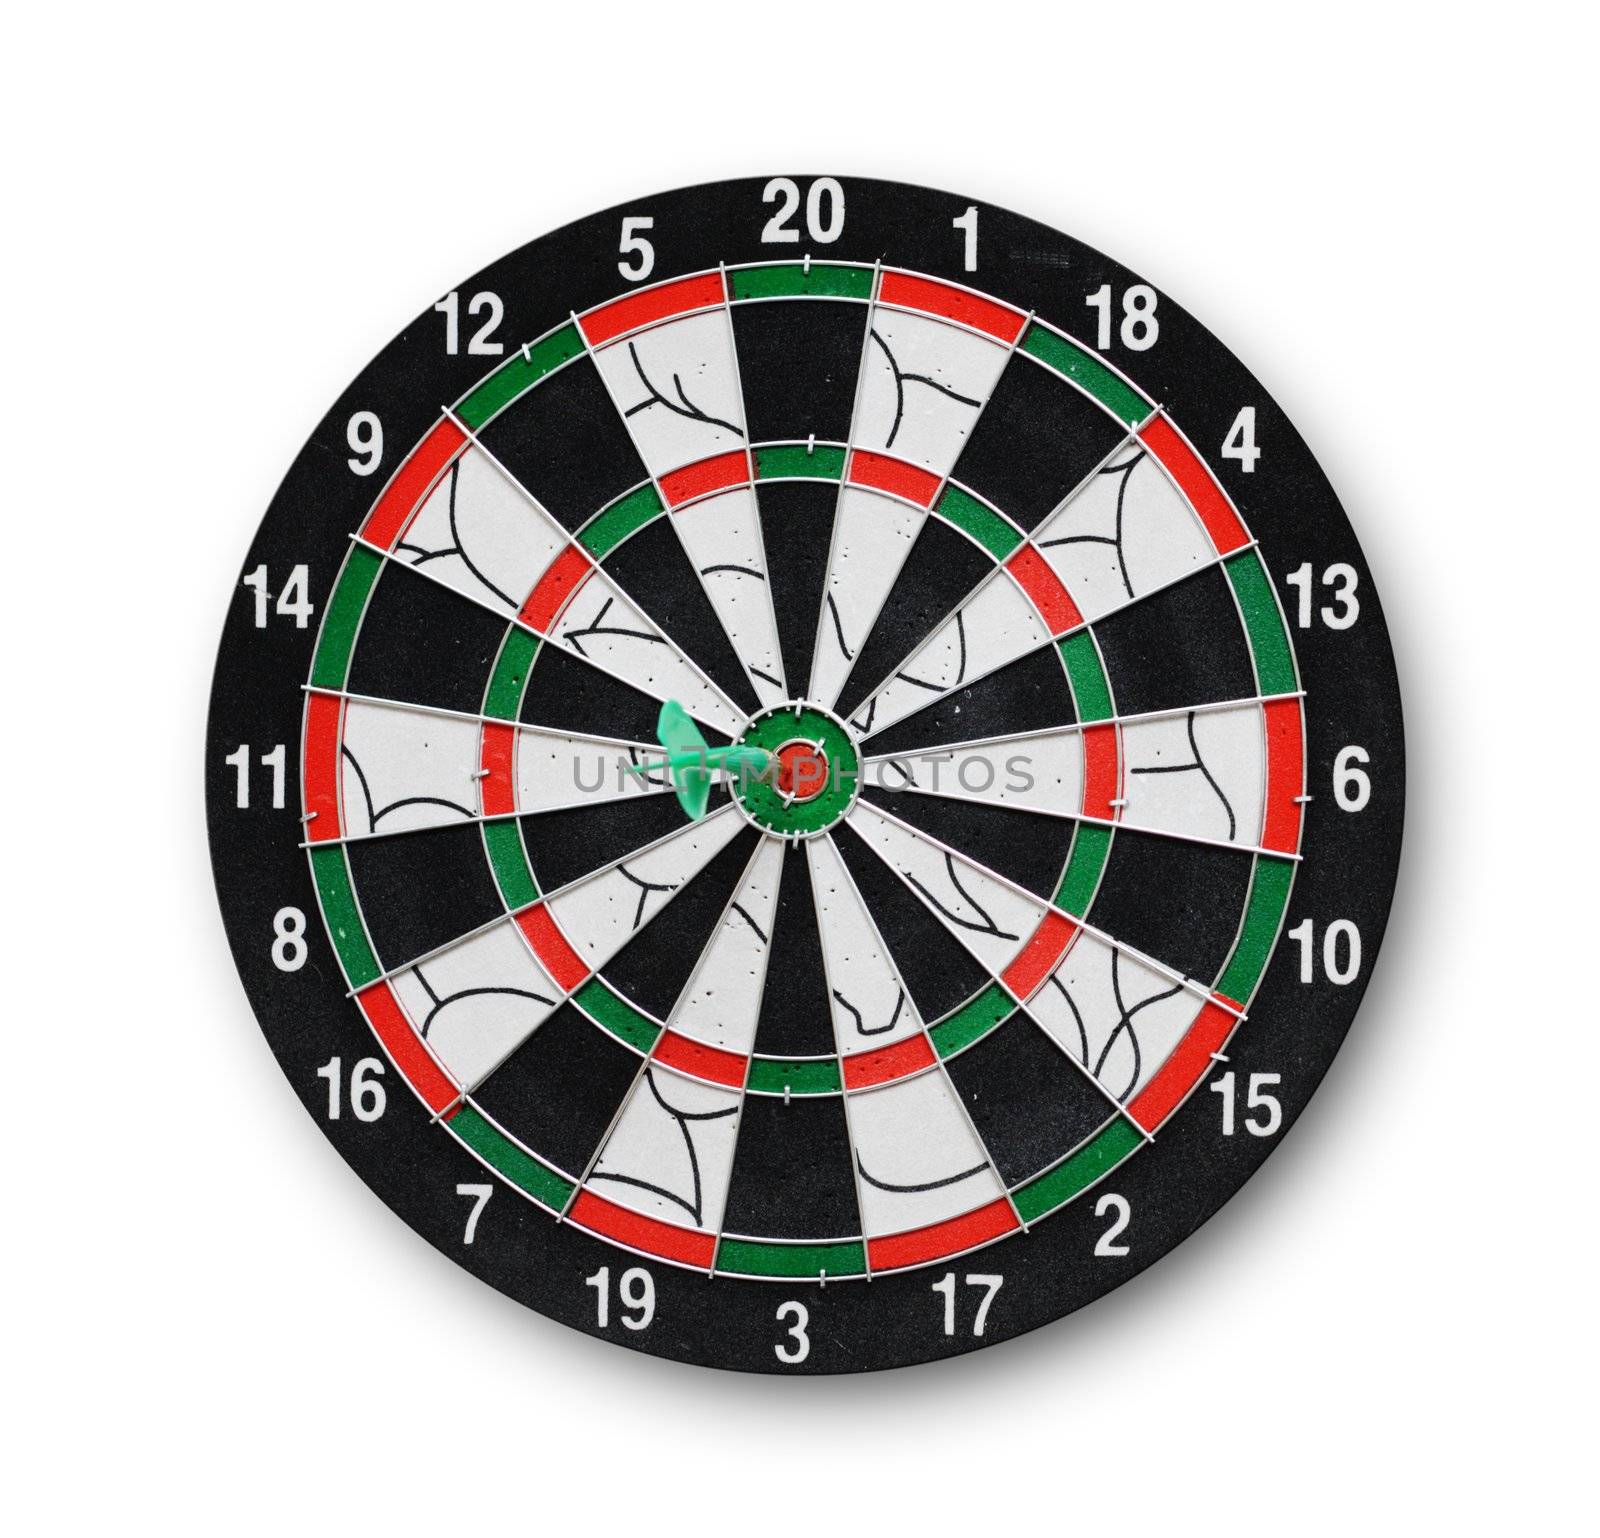 Darts board with a dart in the center by Gdolgikh